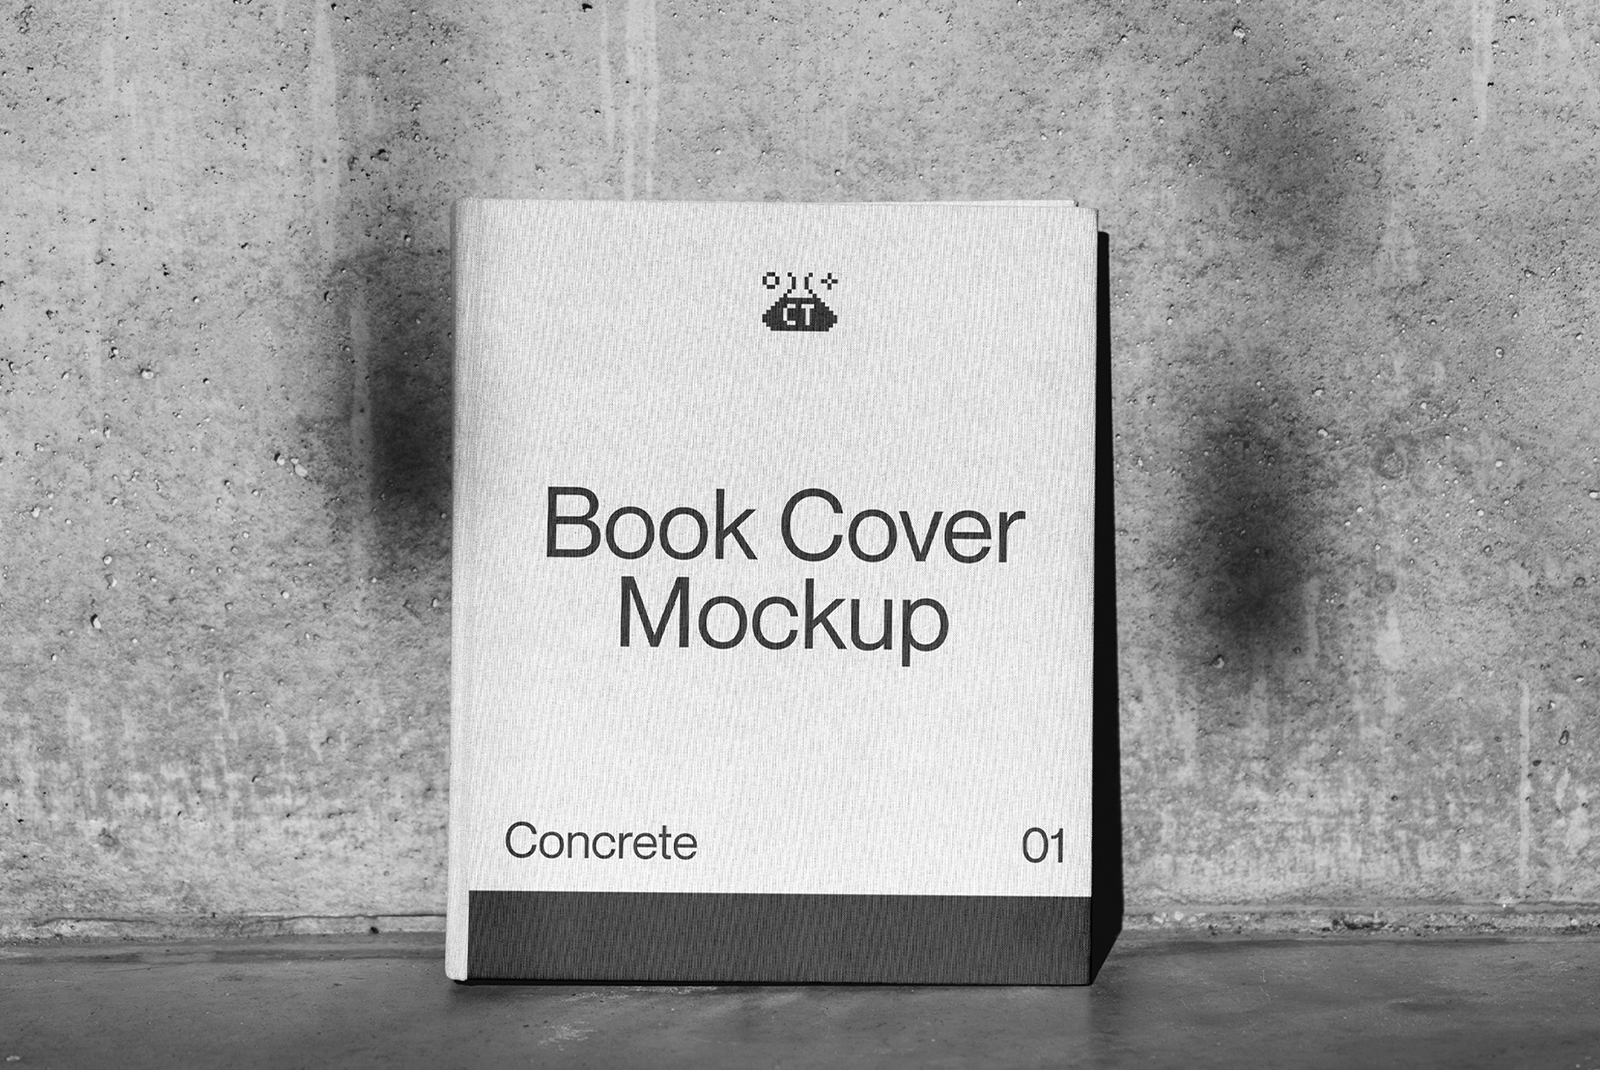 Black and white book cover mockup standing against a textured concrete wall, ideal for designers' presentations and portfolios.